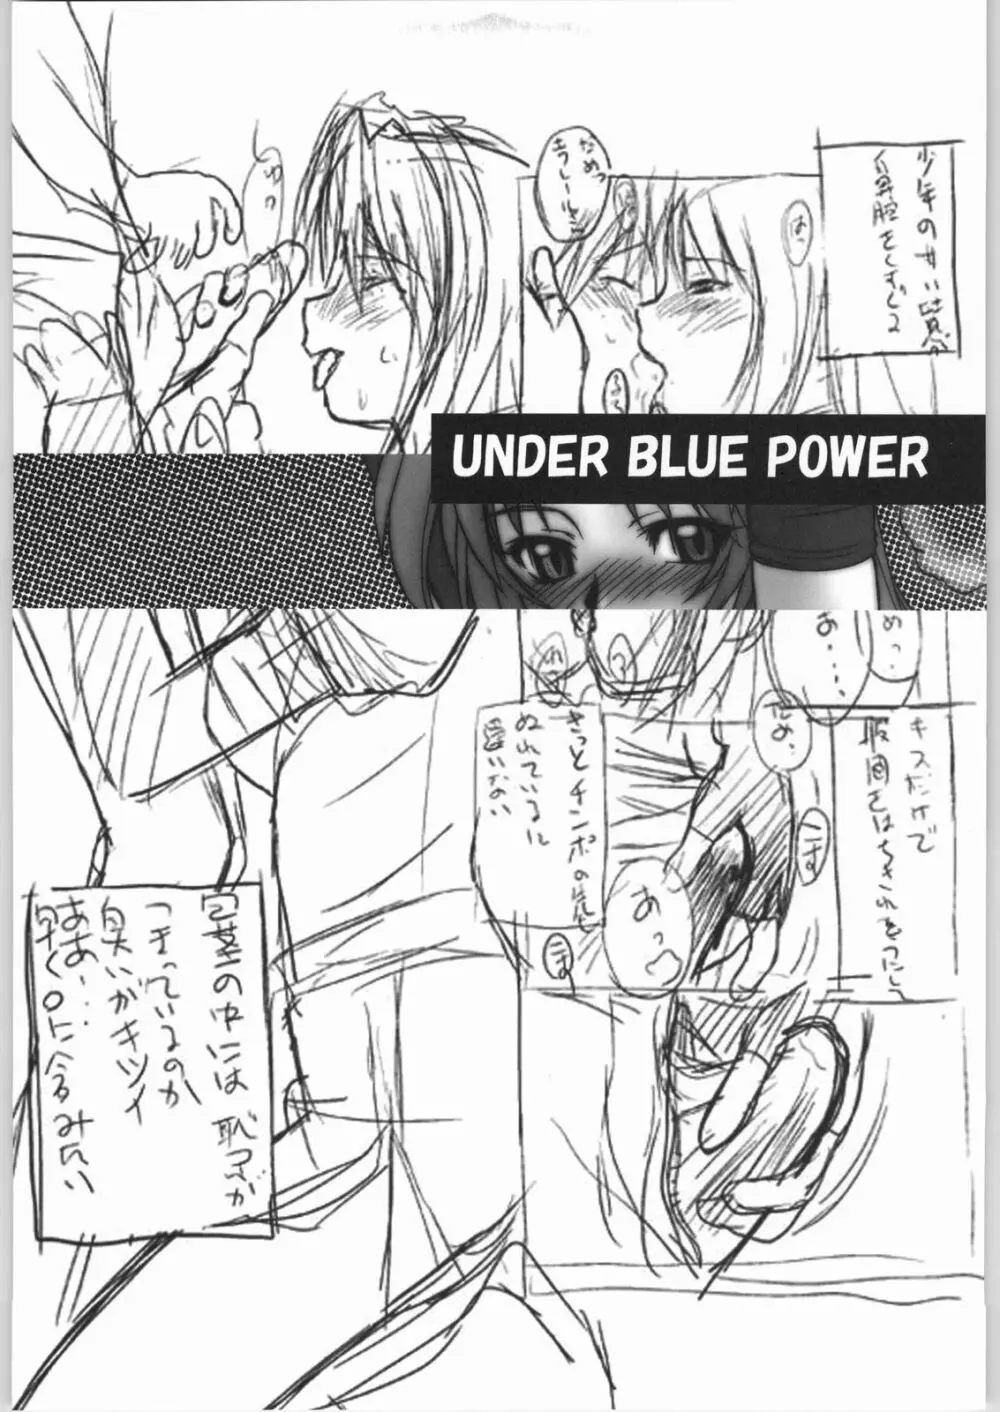 UNDER BLUE POWER - page2